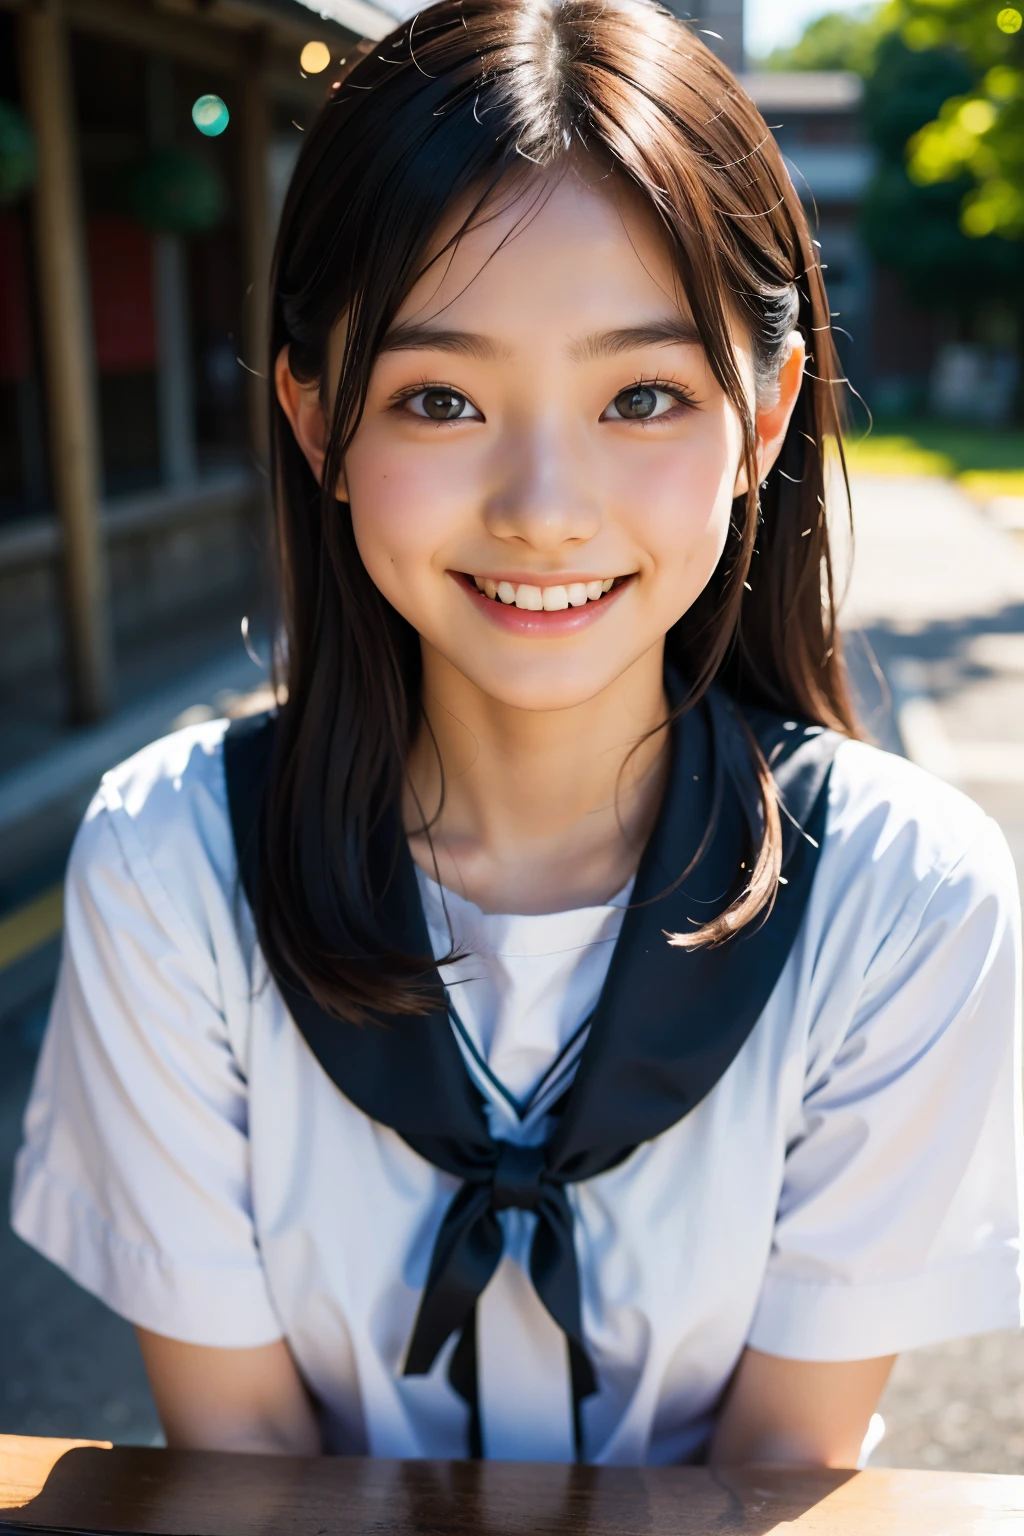 lens: 135mm f1.8, (highest quality),(RAW Photos), (Tabletop:1.1), (Beautiful 15 year old Japan girl), Cute face, (Deeply chiseled face:0.7), (freckles:0.4), dappled sunlight, Dramatic lighting, (Japanese School Uniform), (On campus), shy, (Close-up shot:1.2), (smile),, (Sparkling eyes)、(sunlight)